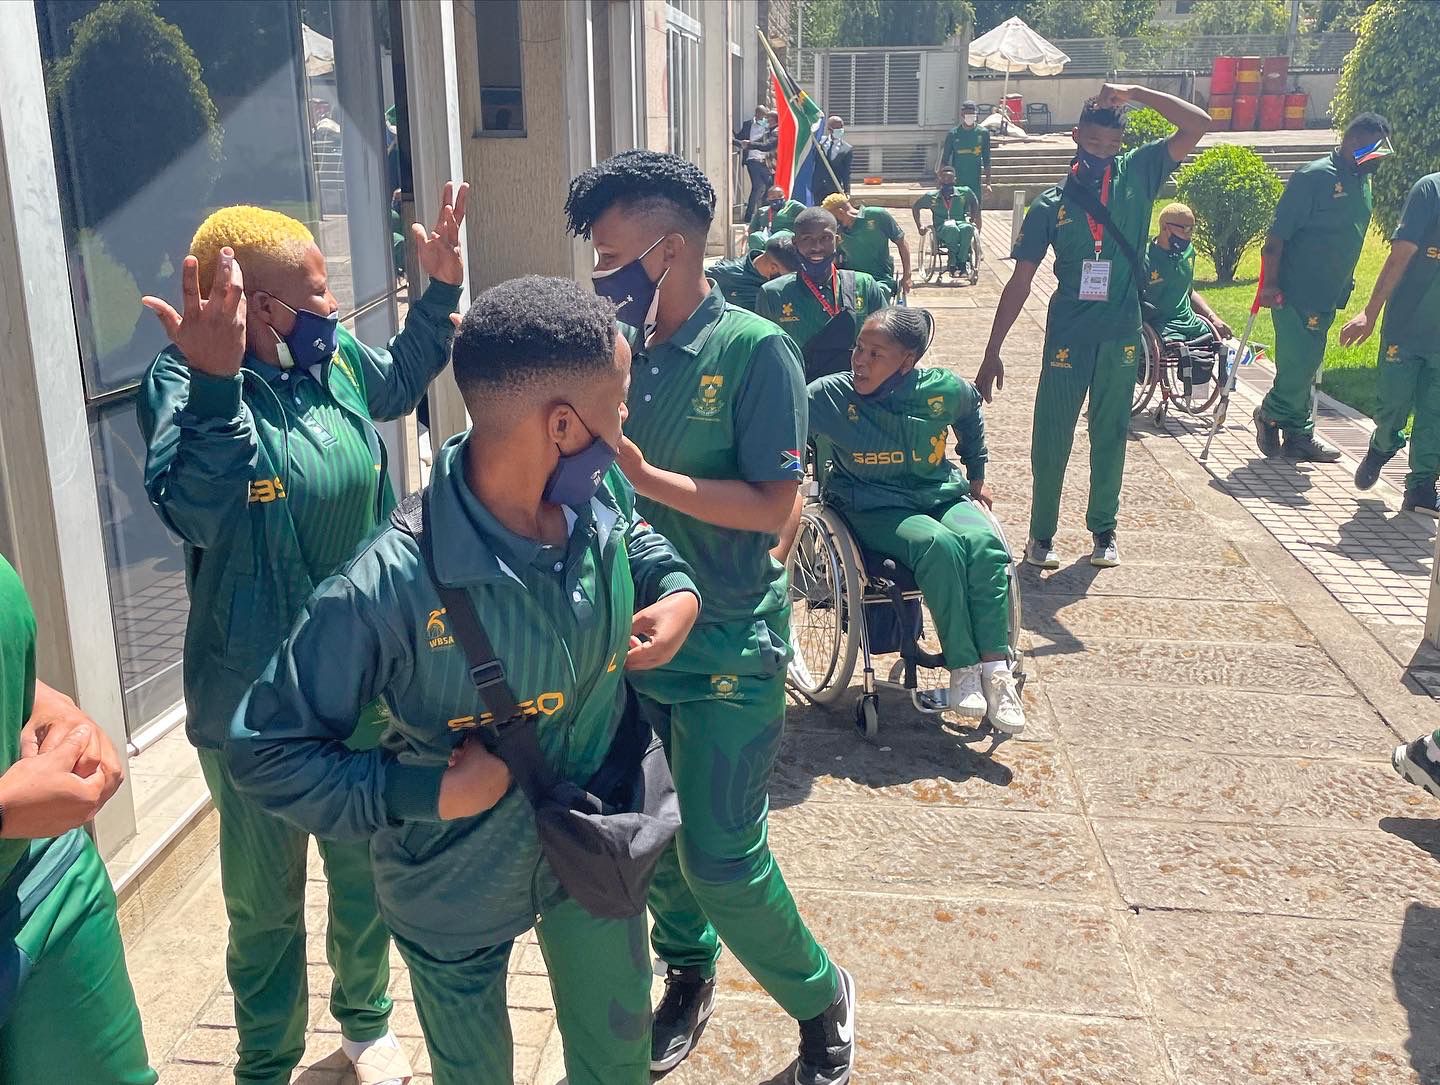 H.E. Ambassador Makaya addressing South Africa’s wheelchair basketball team who are competing against various African countries, on 25 January 2022